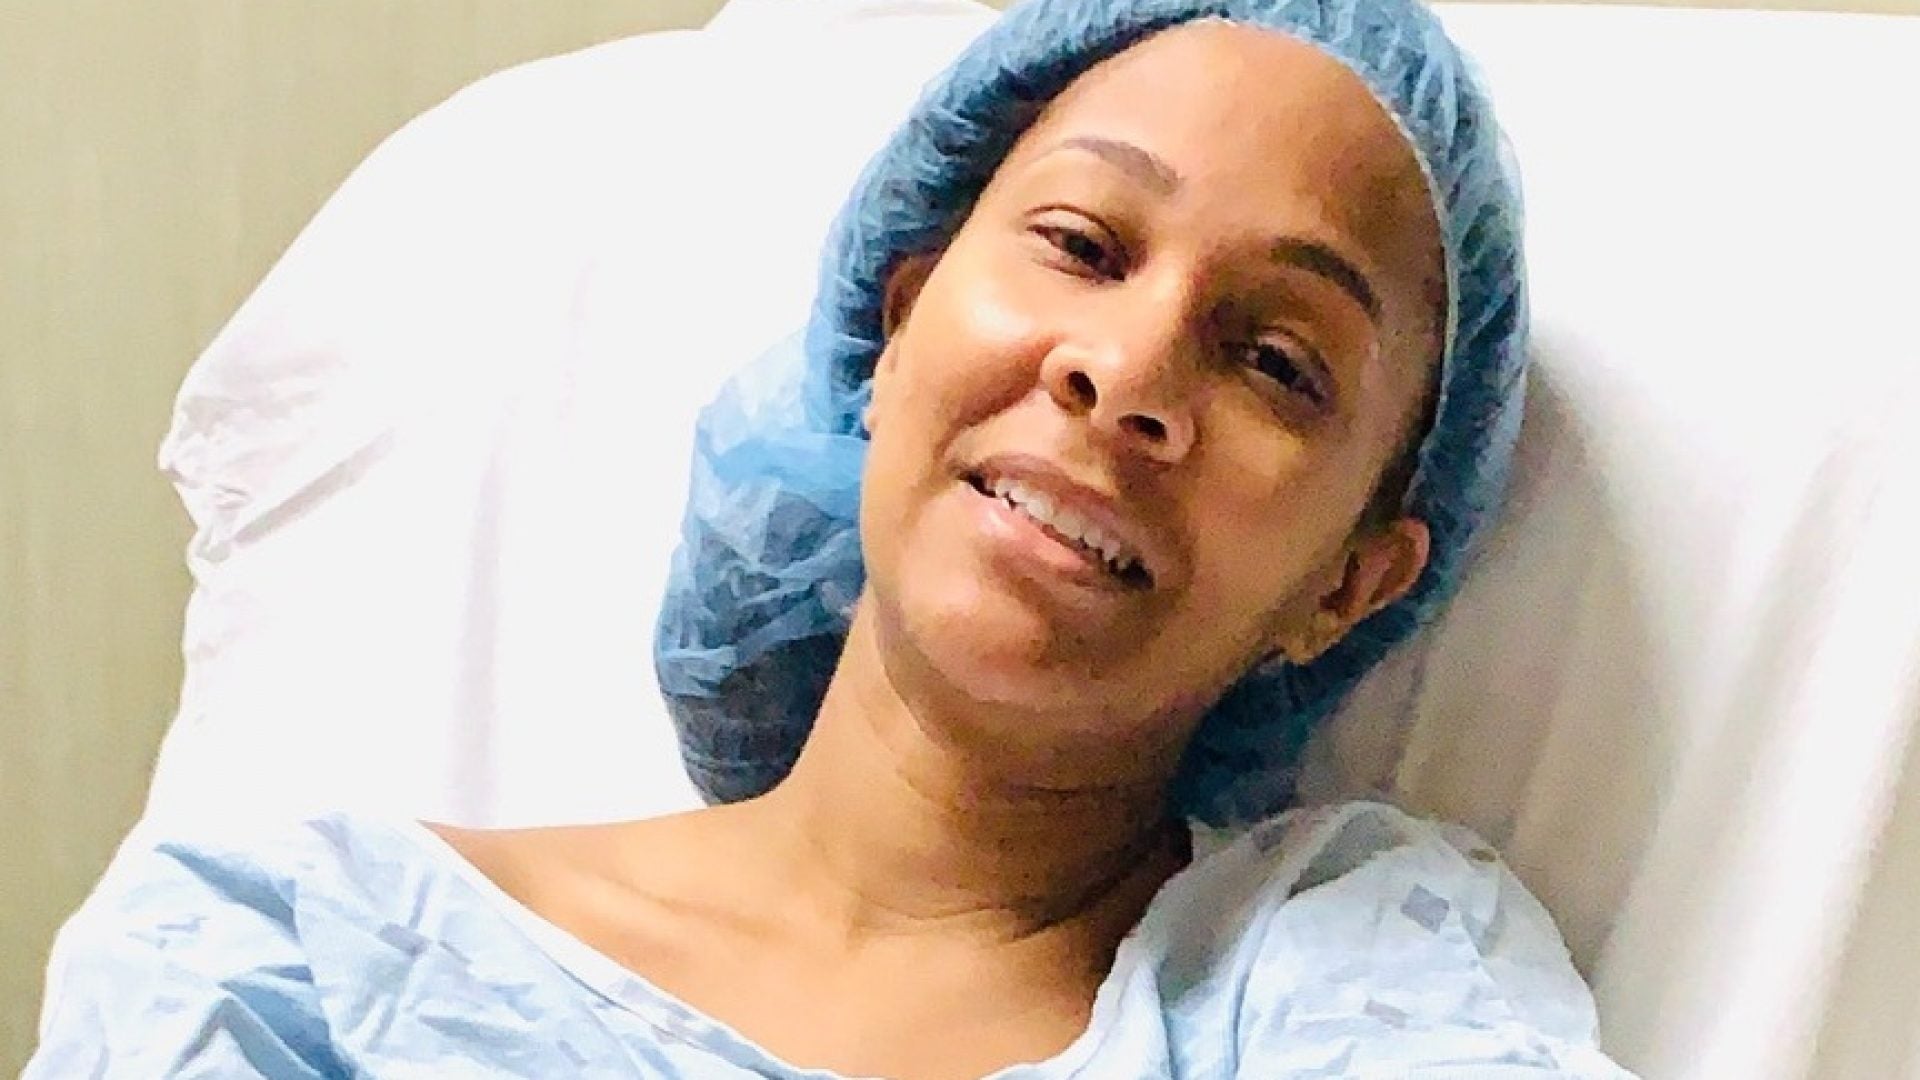 Anatomy of a Breast Cancer Survivor: 'I Preserved My Eggs Before Chemotherapy'